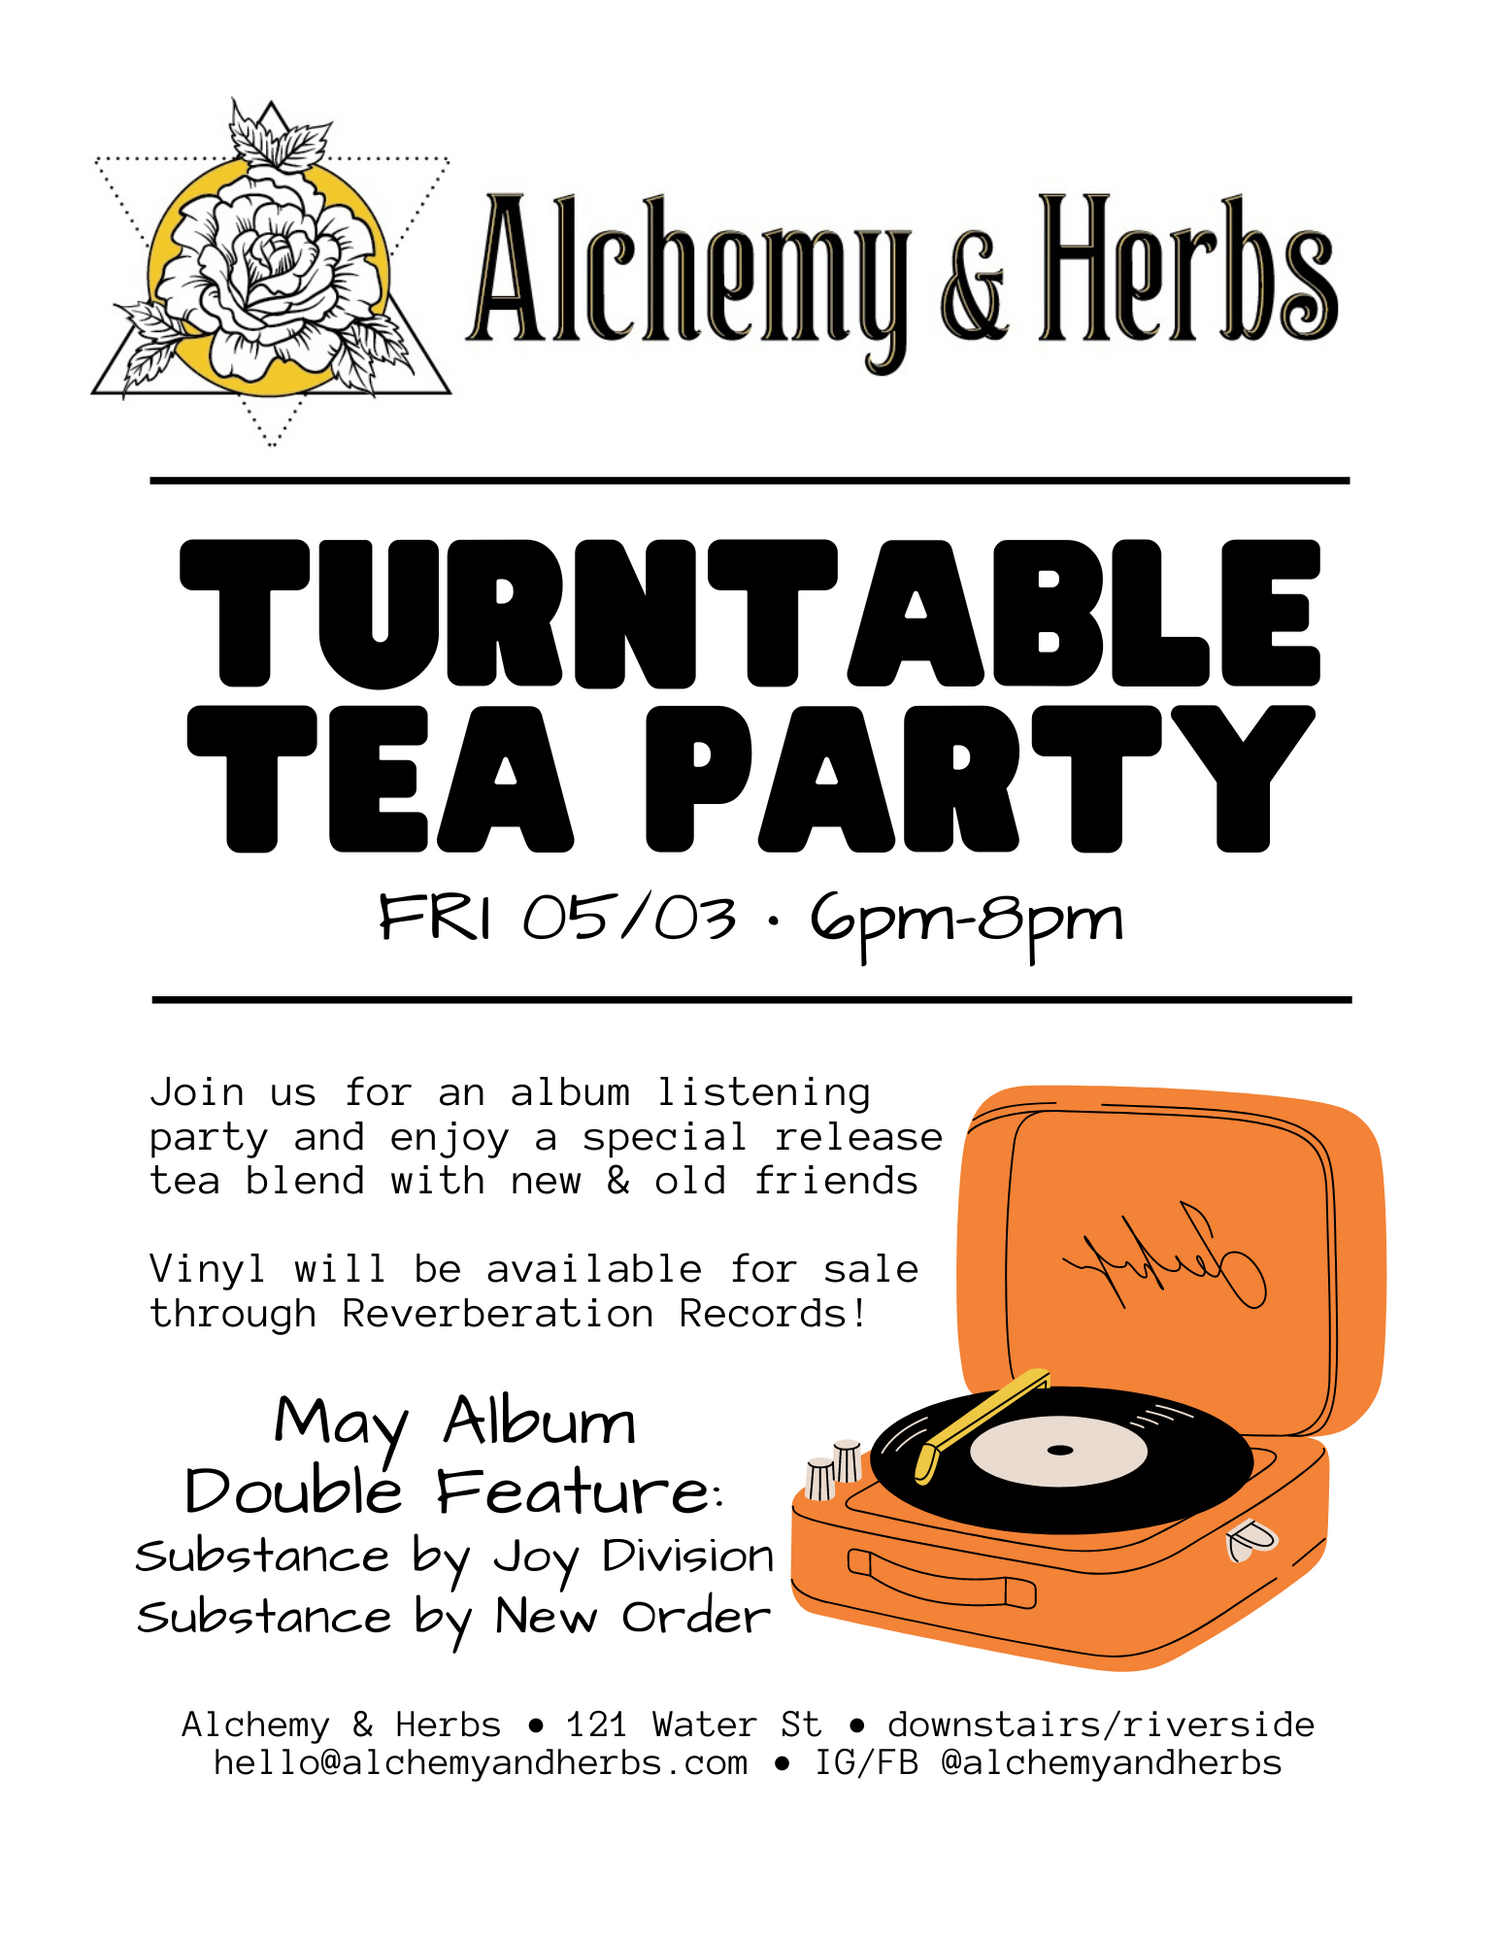 Turntable Tea Party Double Feature!